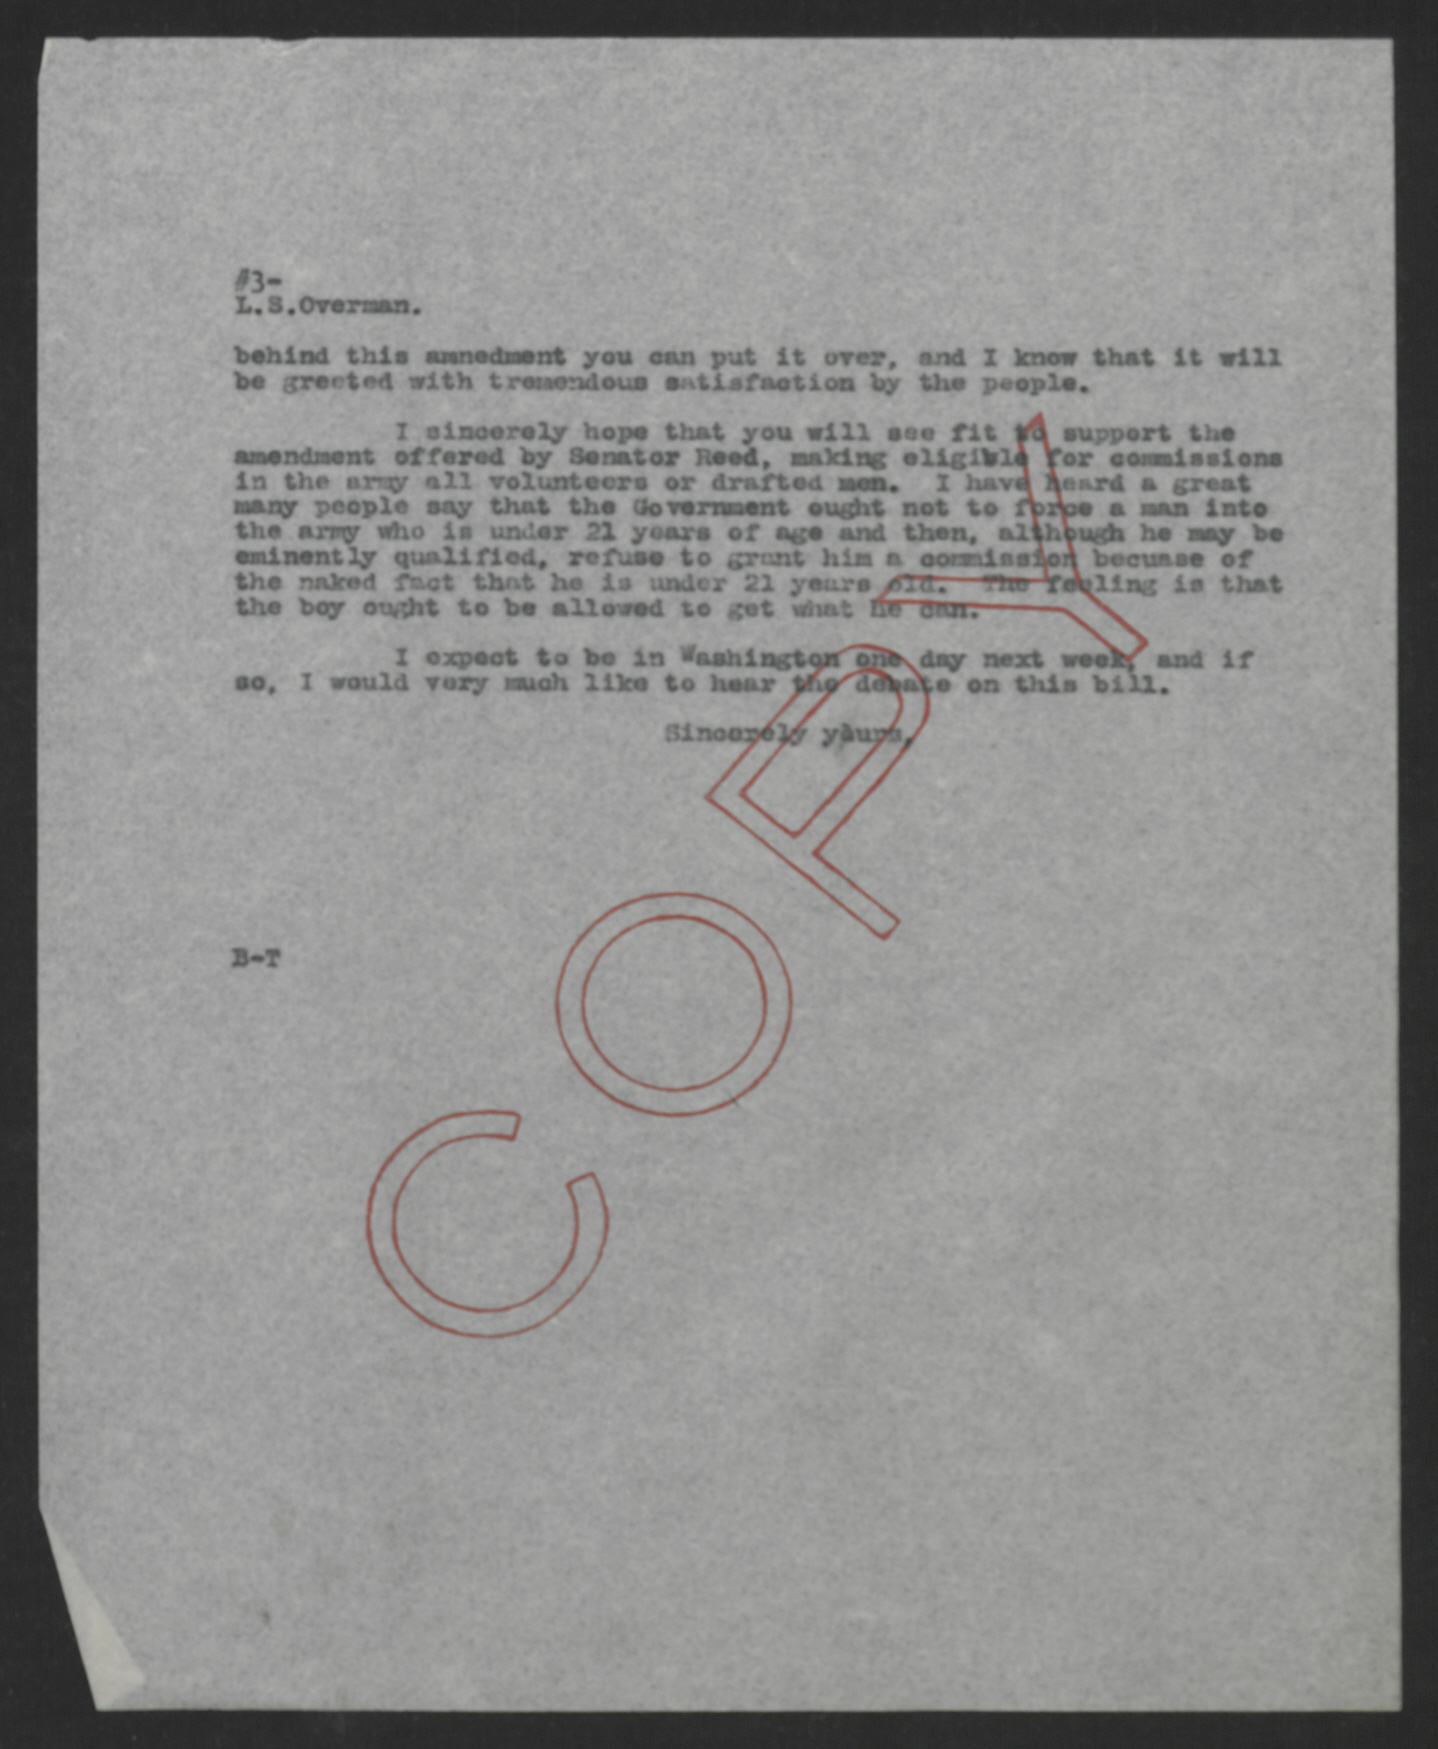 Letter from Thomas W. Bickett to Lee S. Overman, August 15, 1918, page 3